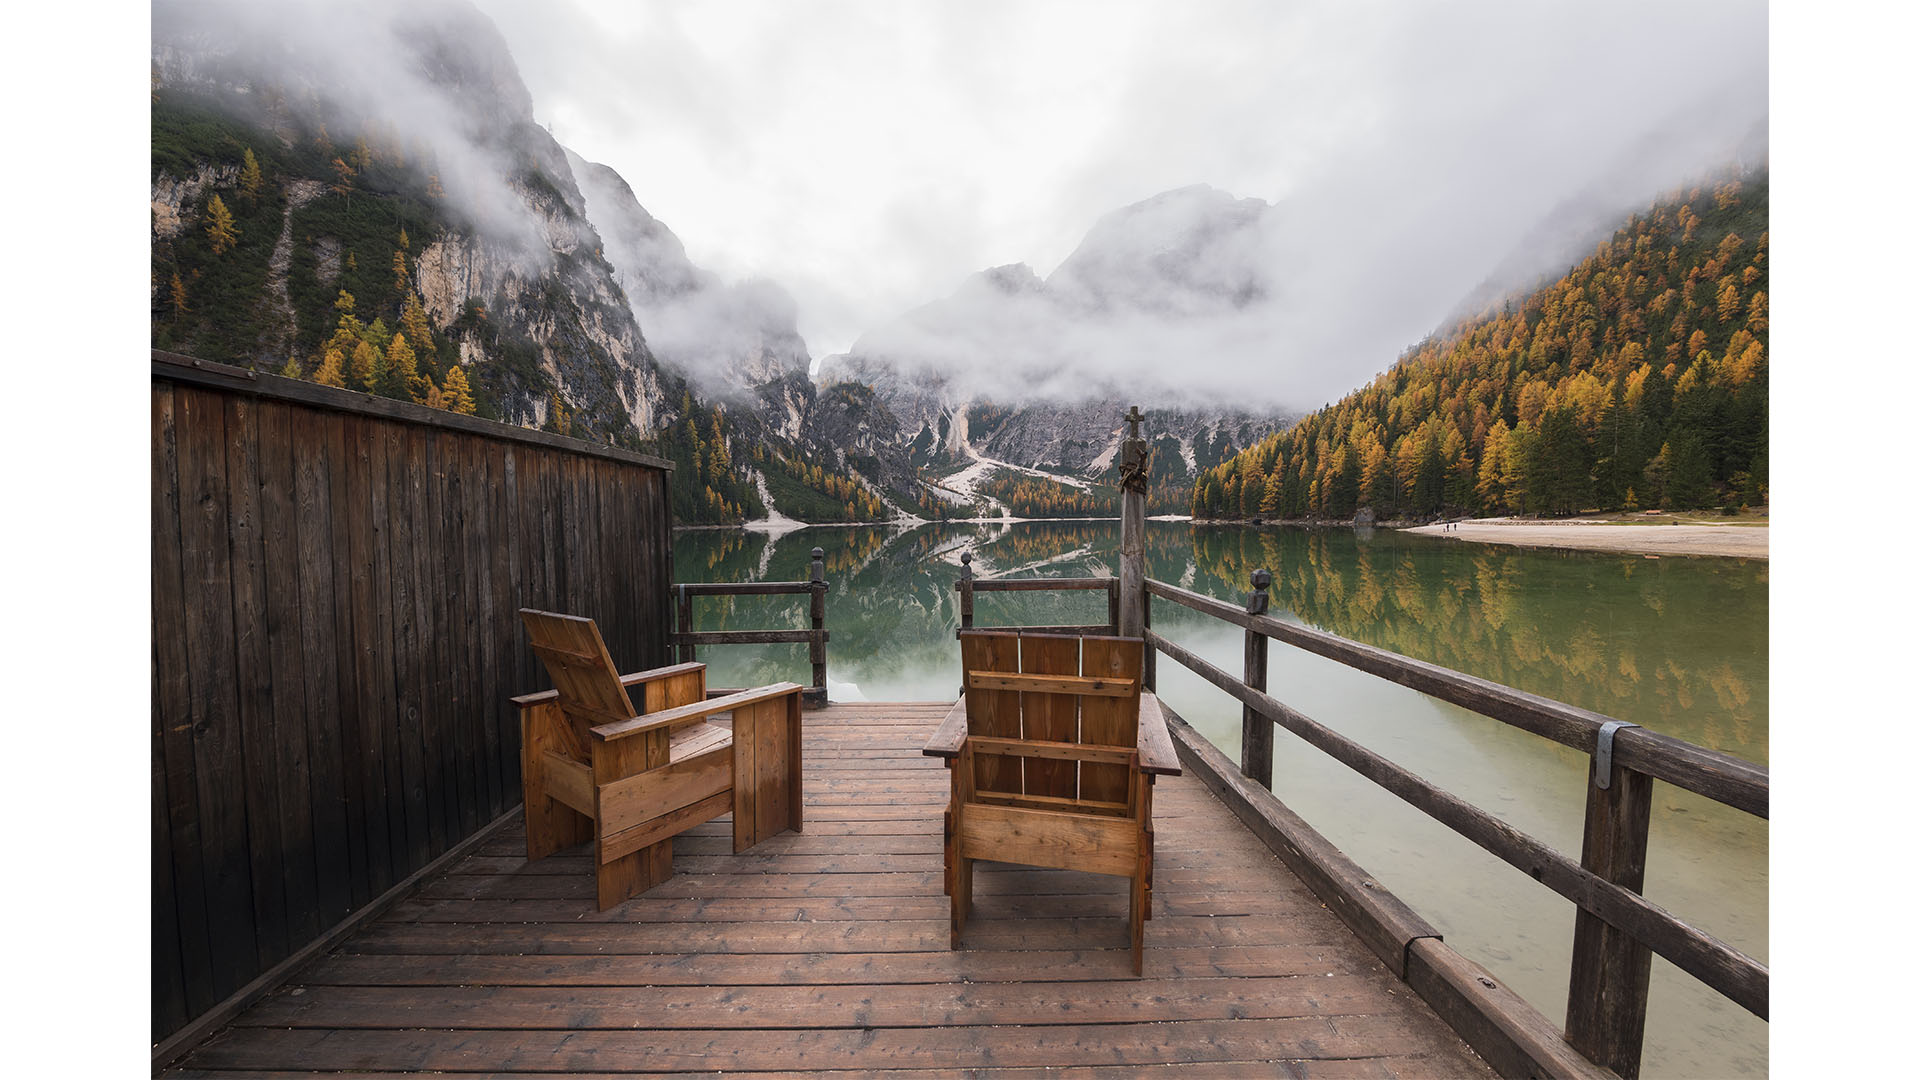 Two wooden chairs on a deck overlook a calm mountain lake, surrounded by mist-covered mountains and autumnal trees. Enjoy the serene view while reflecting on life's big questions: is renting ruining your future, or is this peaceful haven the escape you truly need?